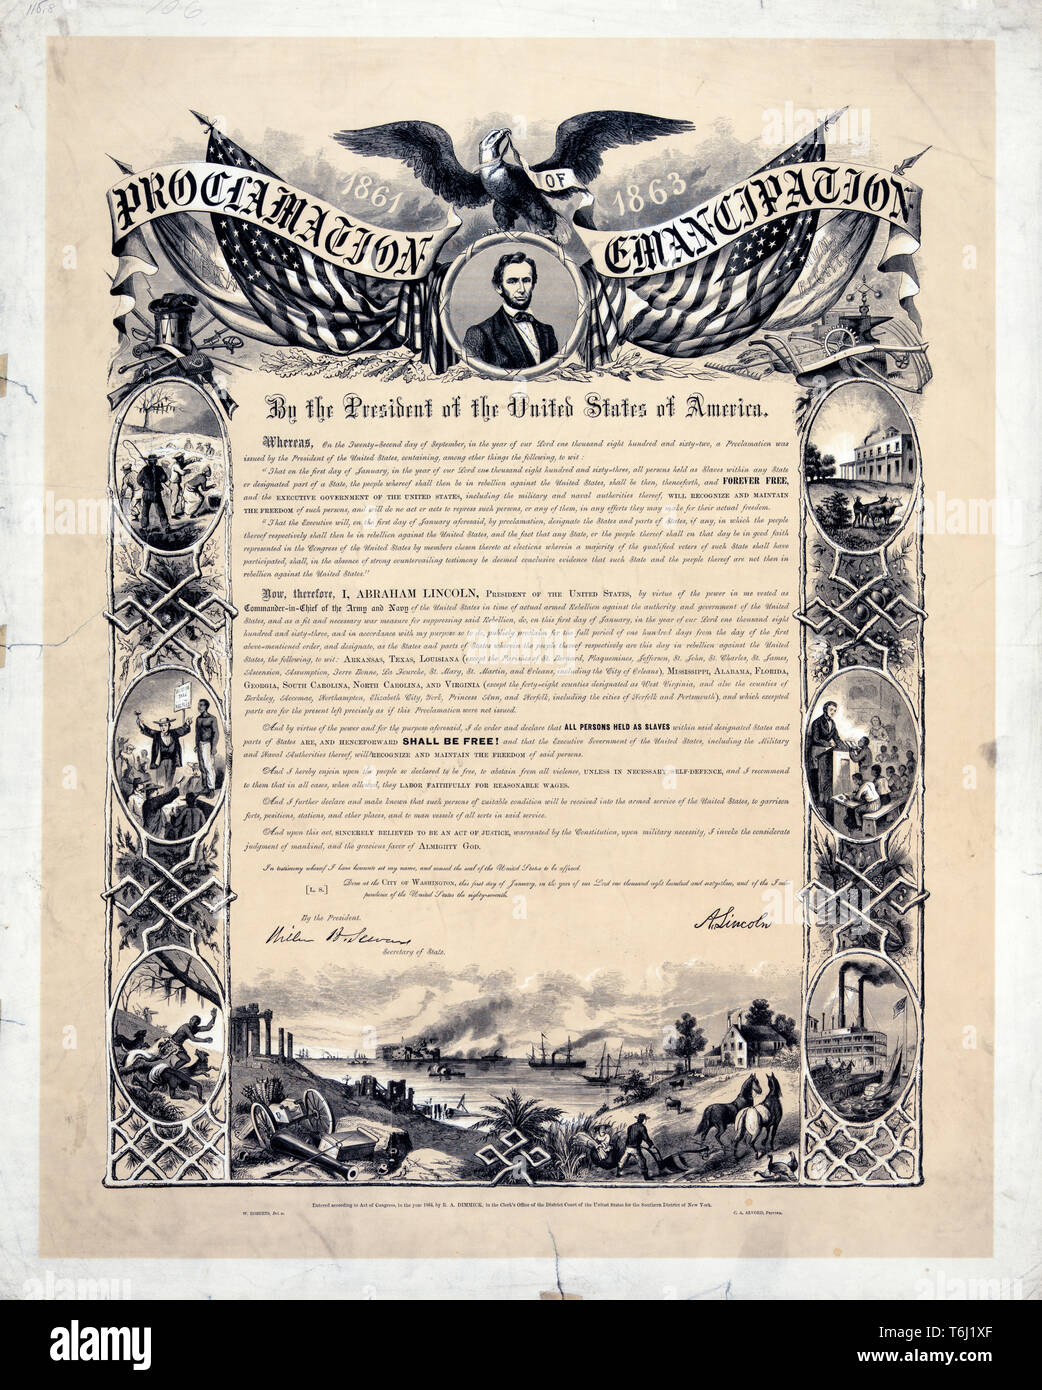 Emancipation Proclamation document, January 1st 1863 by the President of the United States of America showing text with illustrations, published 1864 Stock Photo